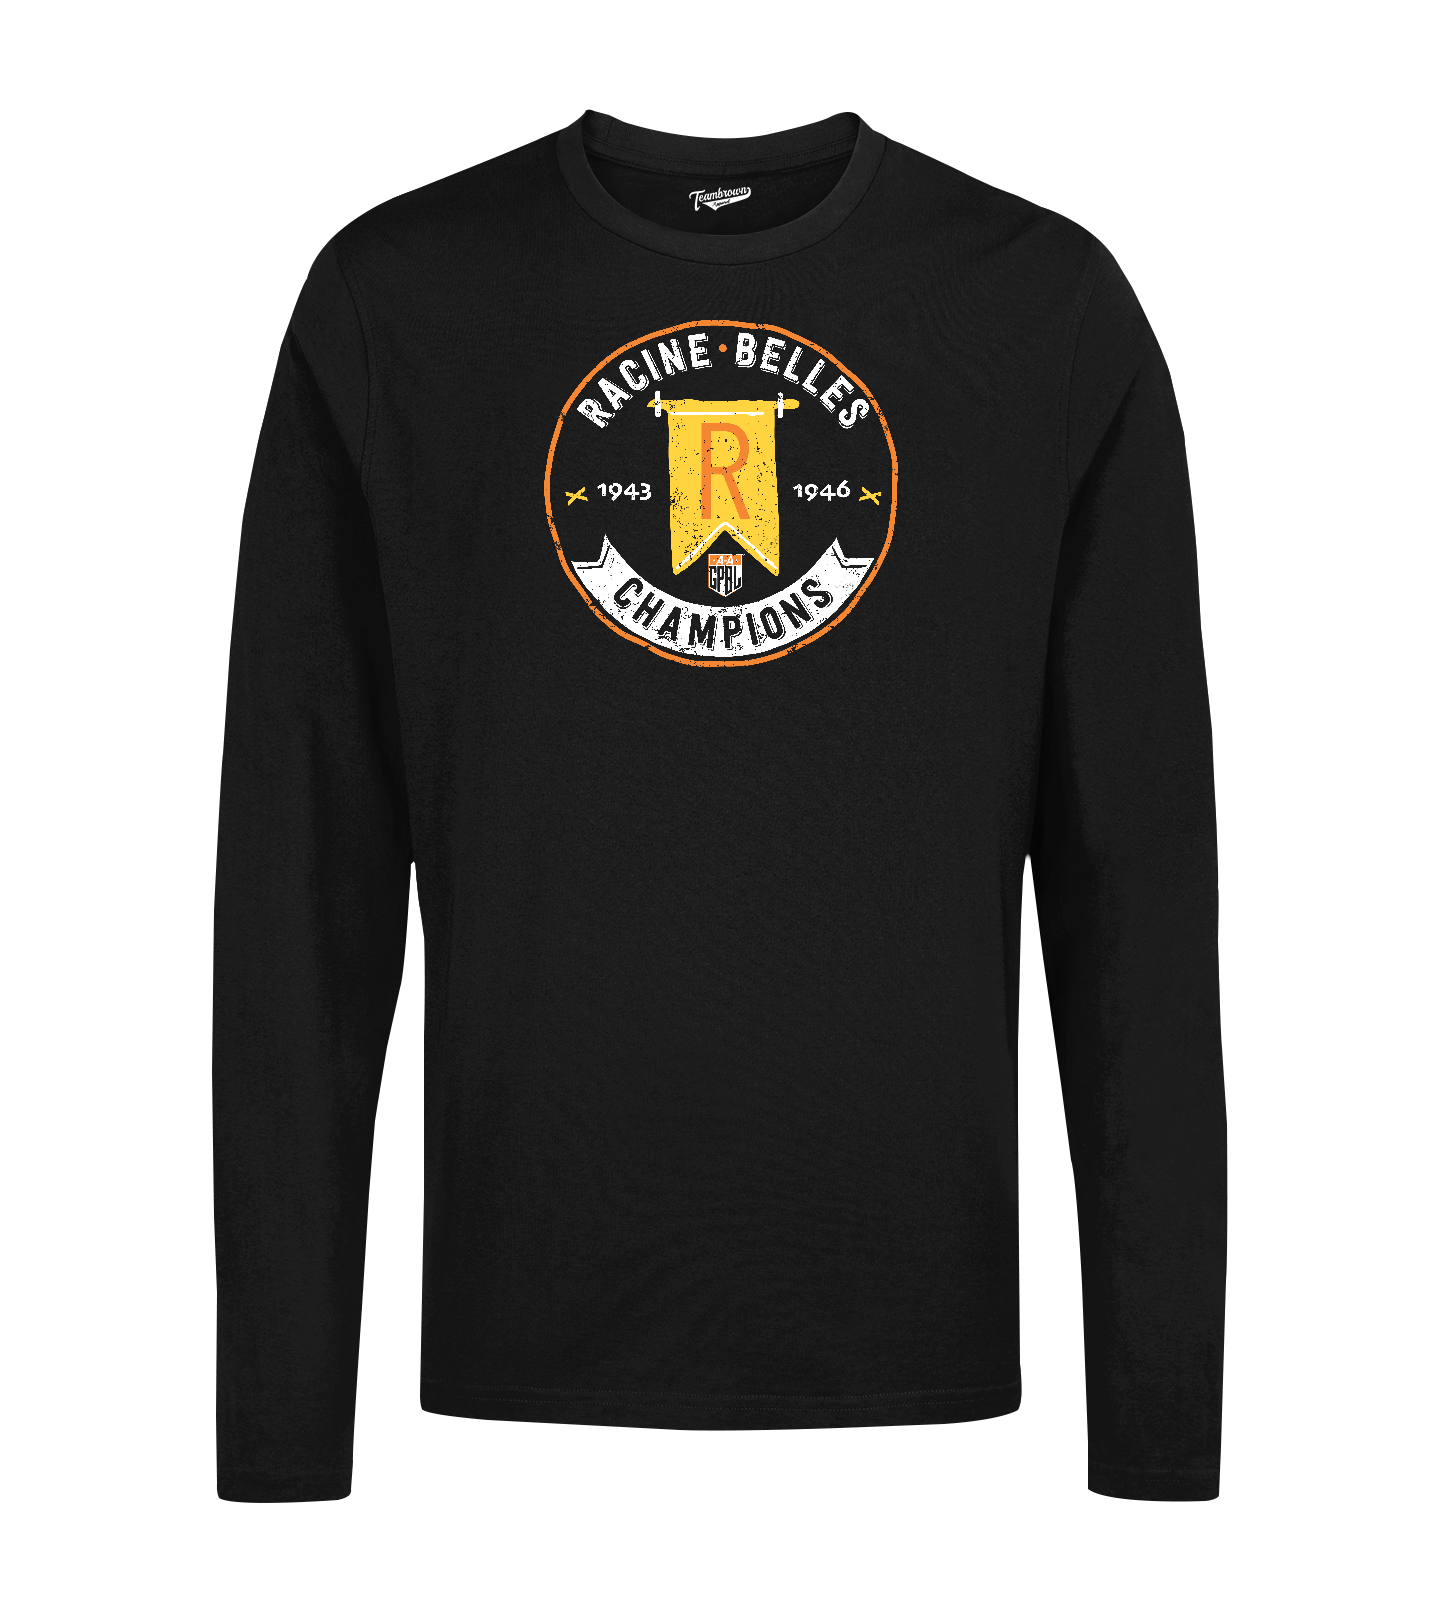 Racine Belles Champions - Unisex Long Sleeve Crew T-Shirt | Officially Licensed - AAGPBL